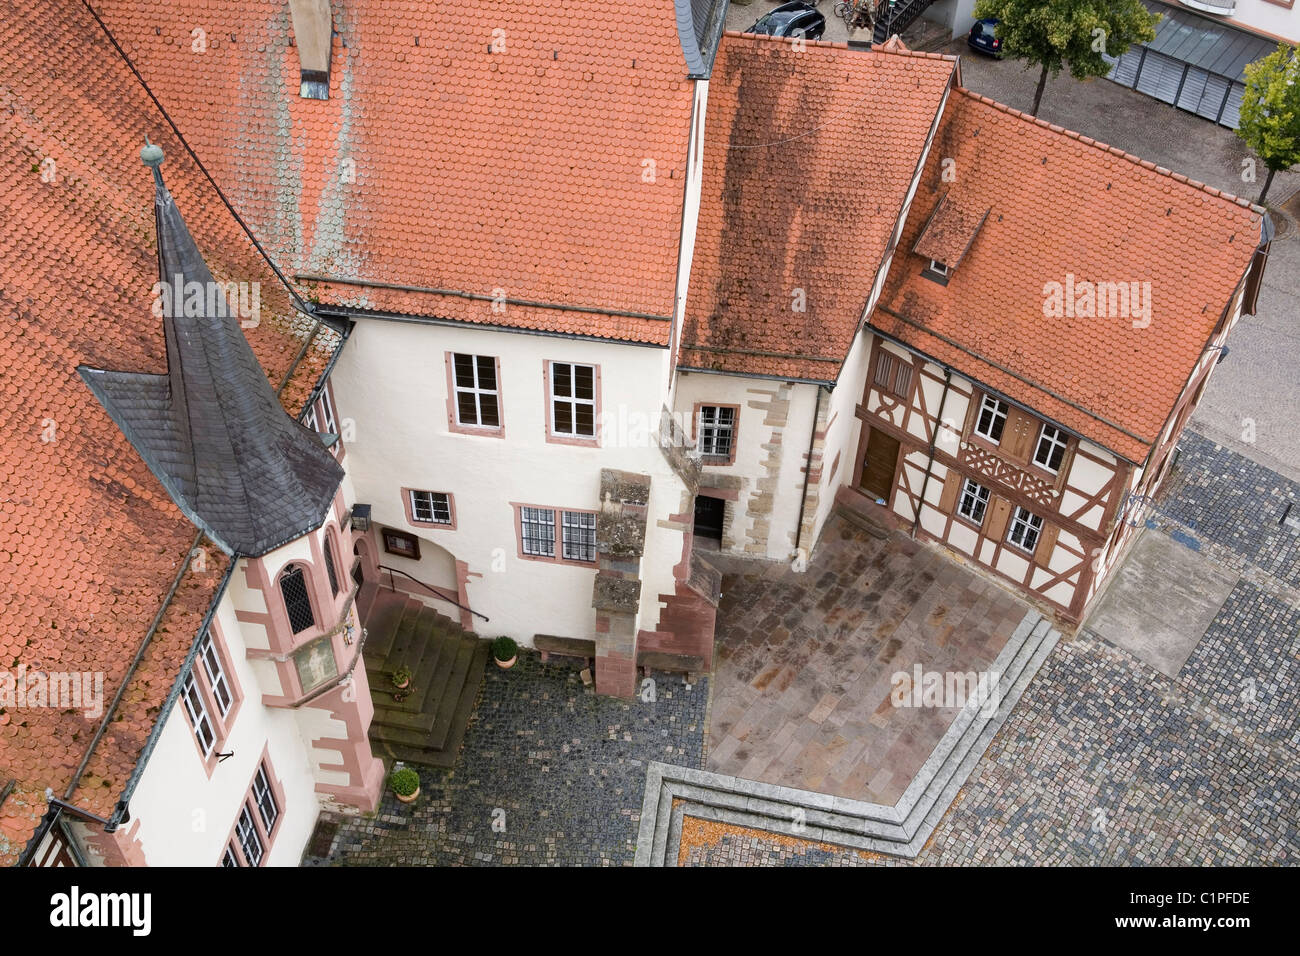 Germany, Bavaria, Tauberbischofsheim, rooftops and buildings from tower Stock Photo